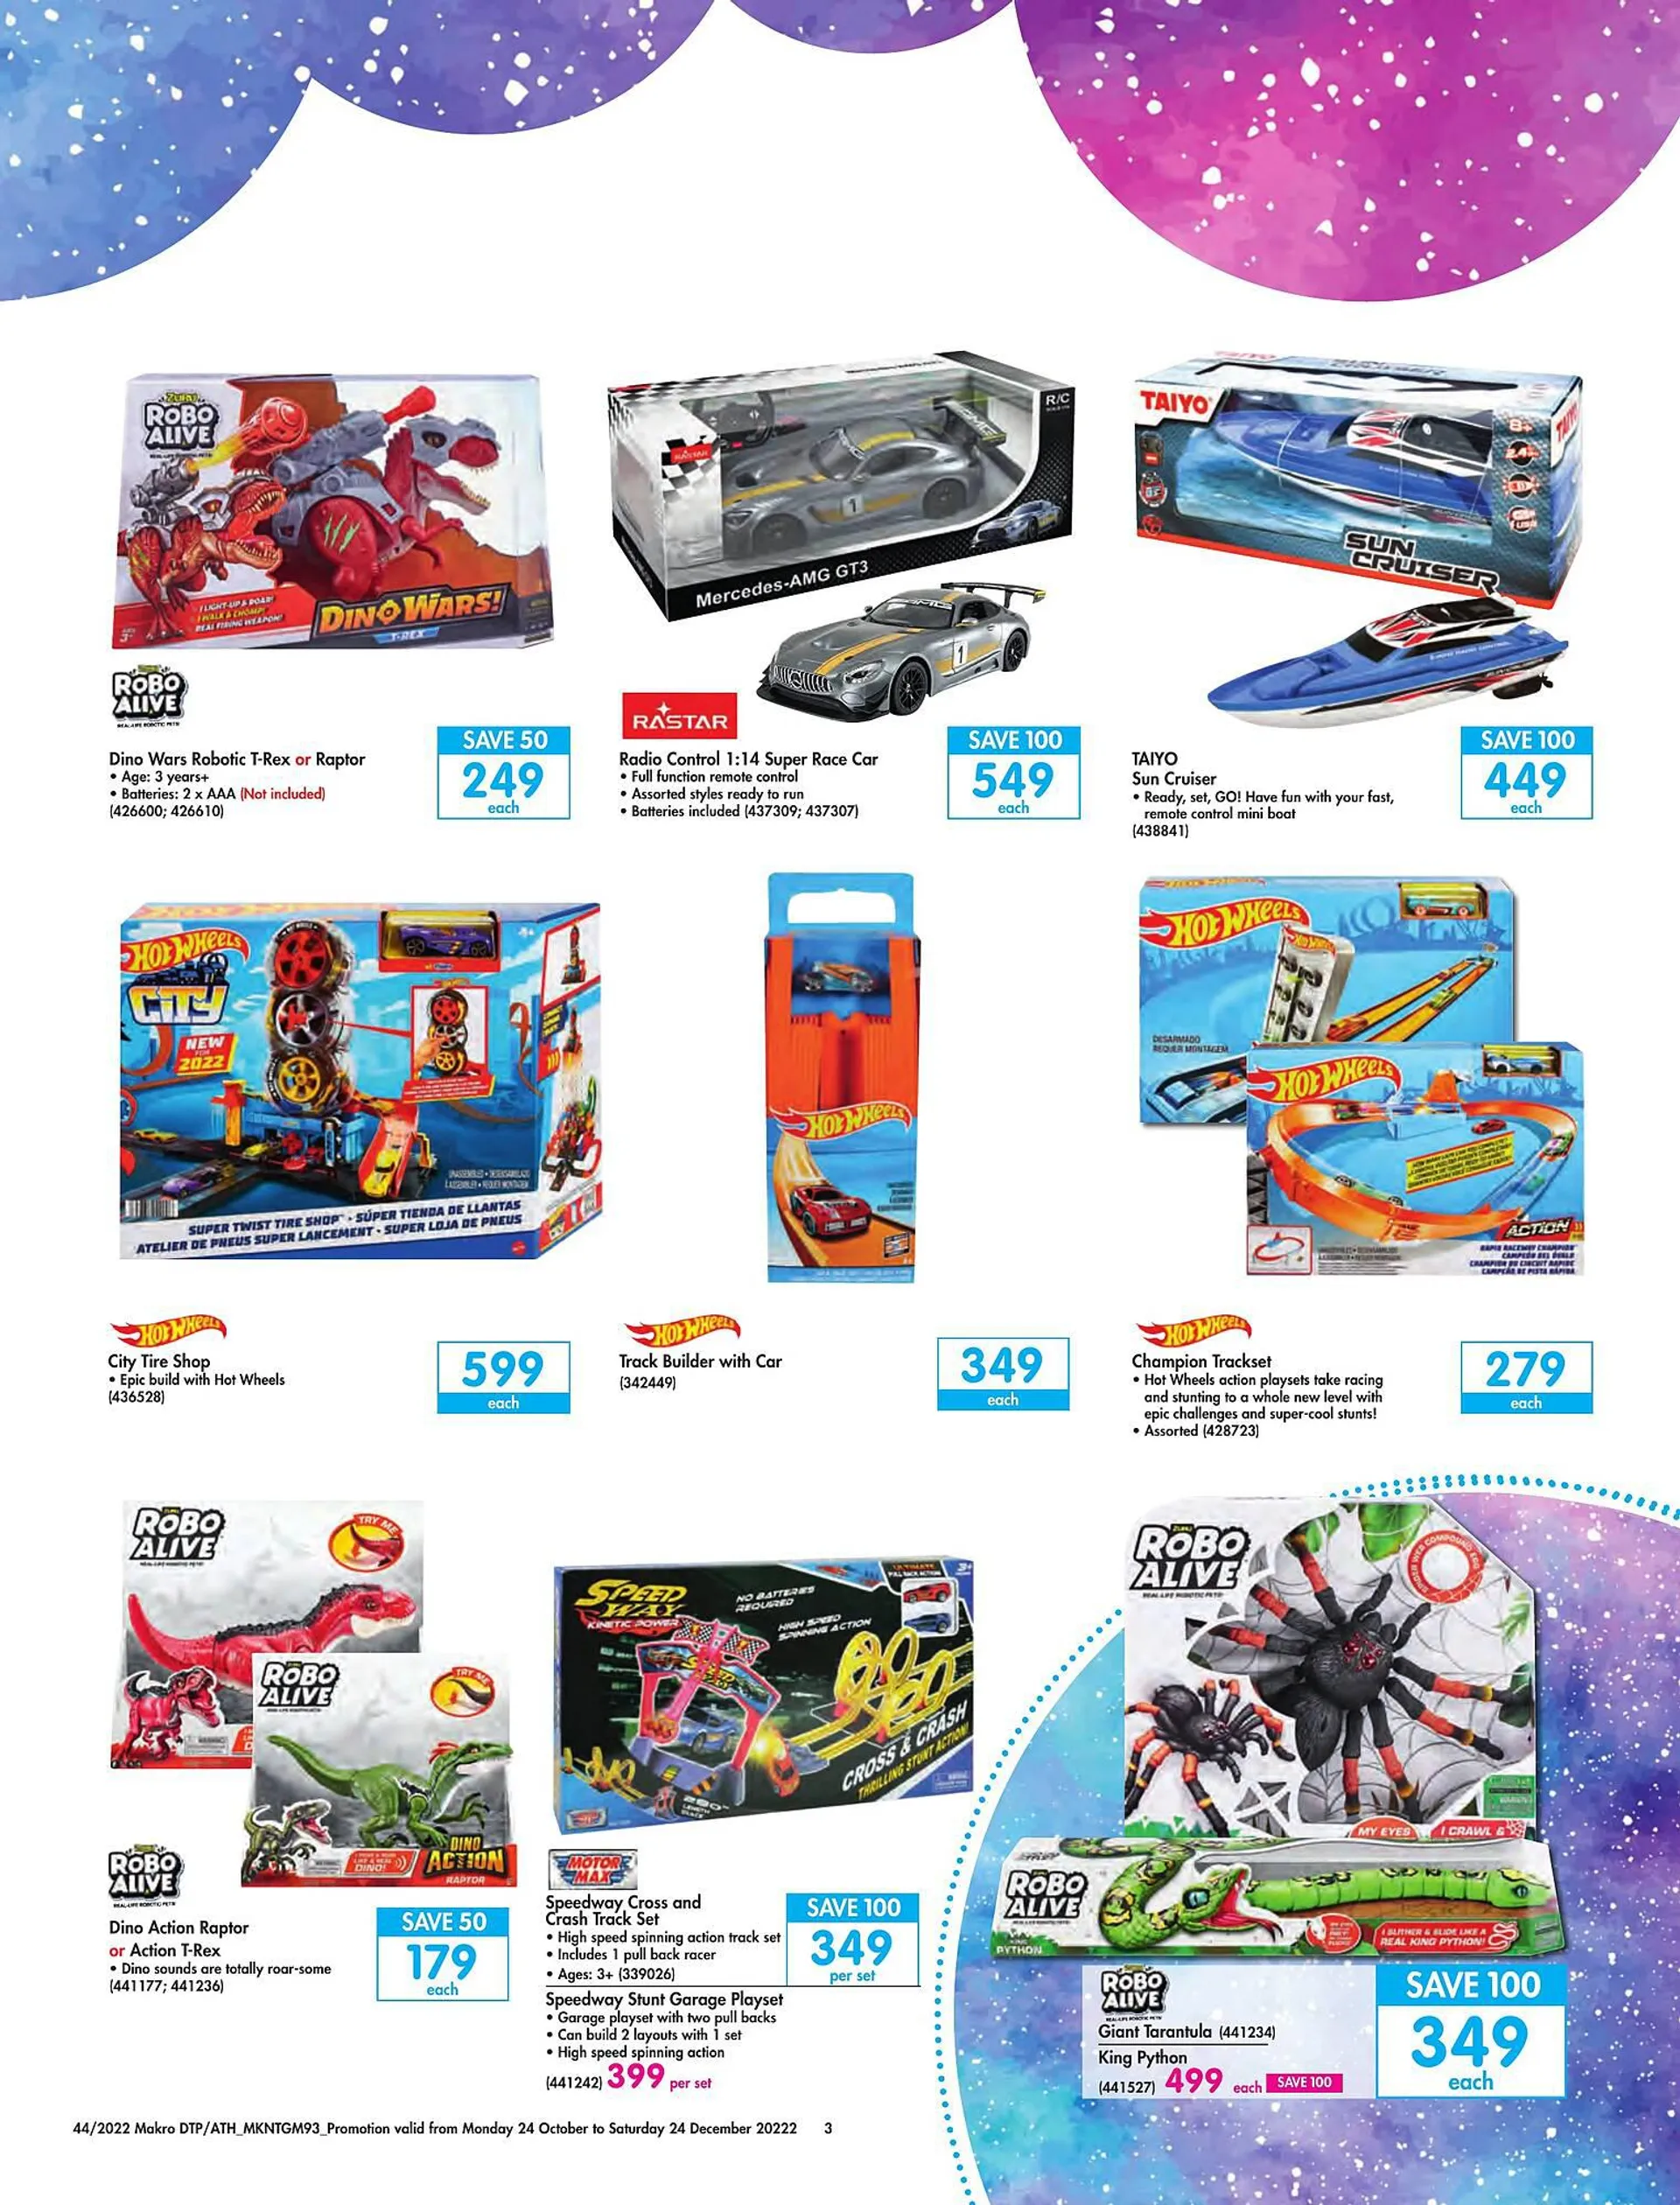 Makro catalogue - Kids Gifting Guide - 3